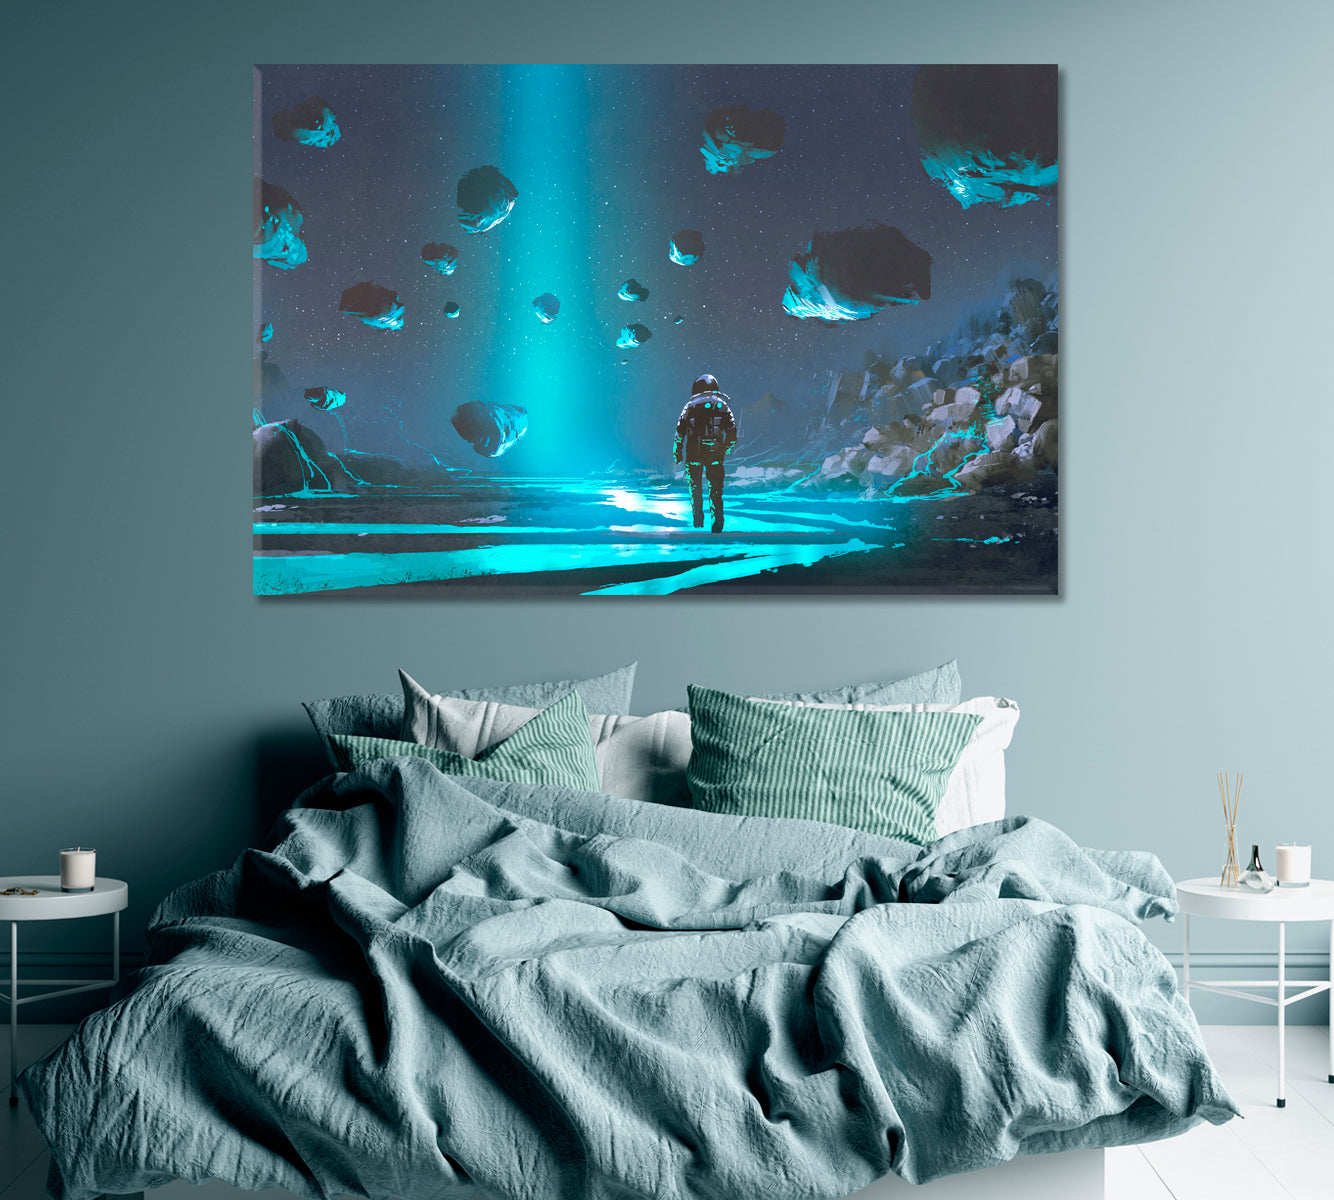 Astronaut on Alien Planet with Glowing Meteorites Canvas Print ArtLexy 1 Panel 24"x16" inches 